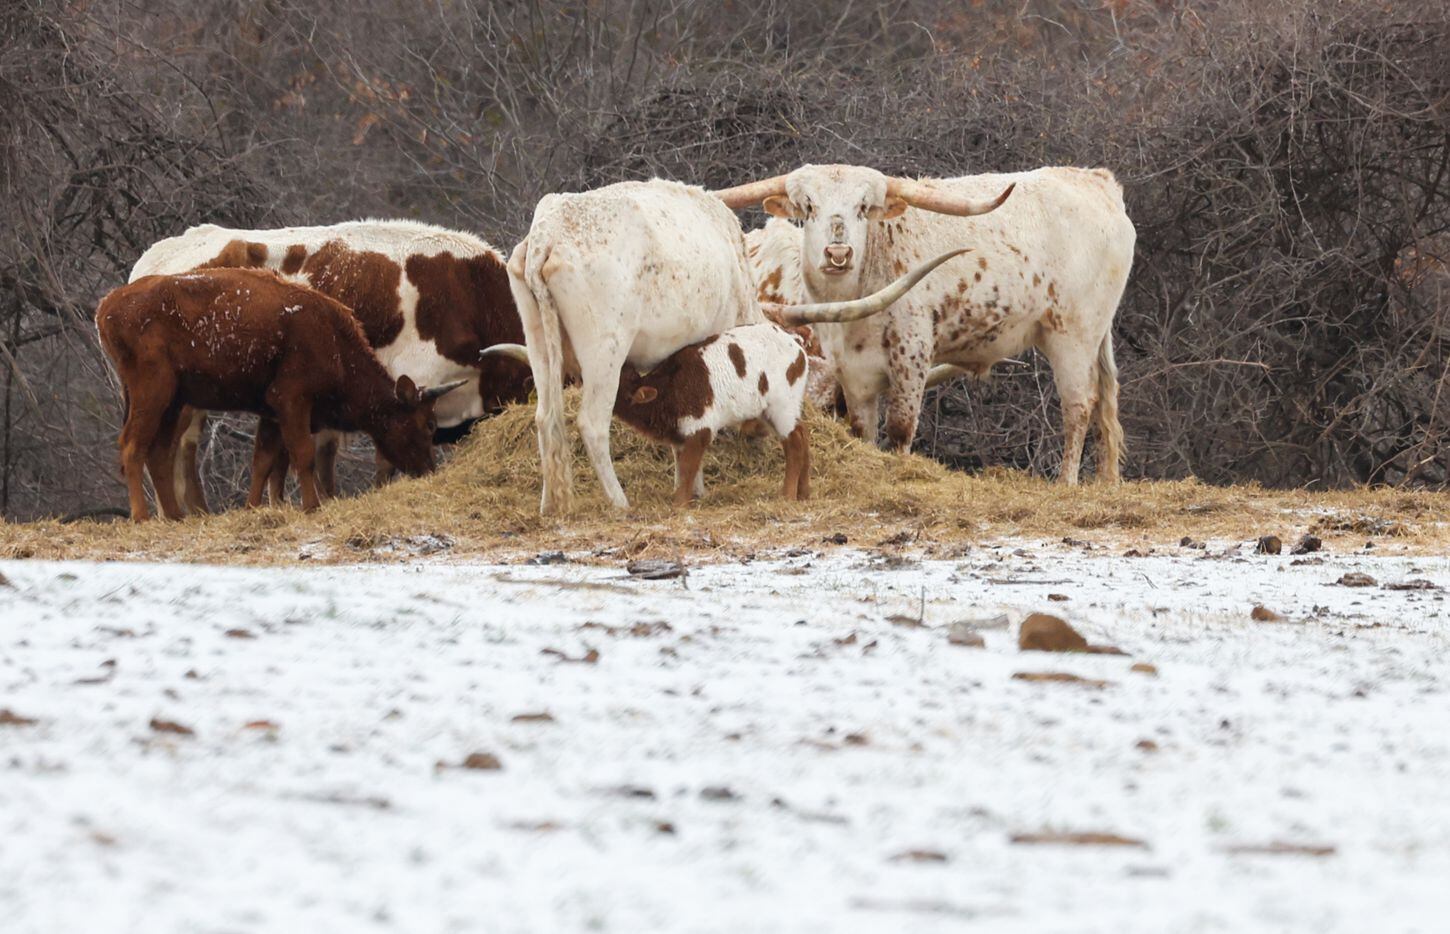 A young longhorn gets milk from its mother as she and other longhorns chew on hay in a...